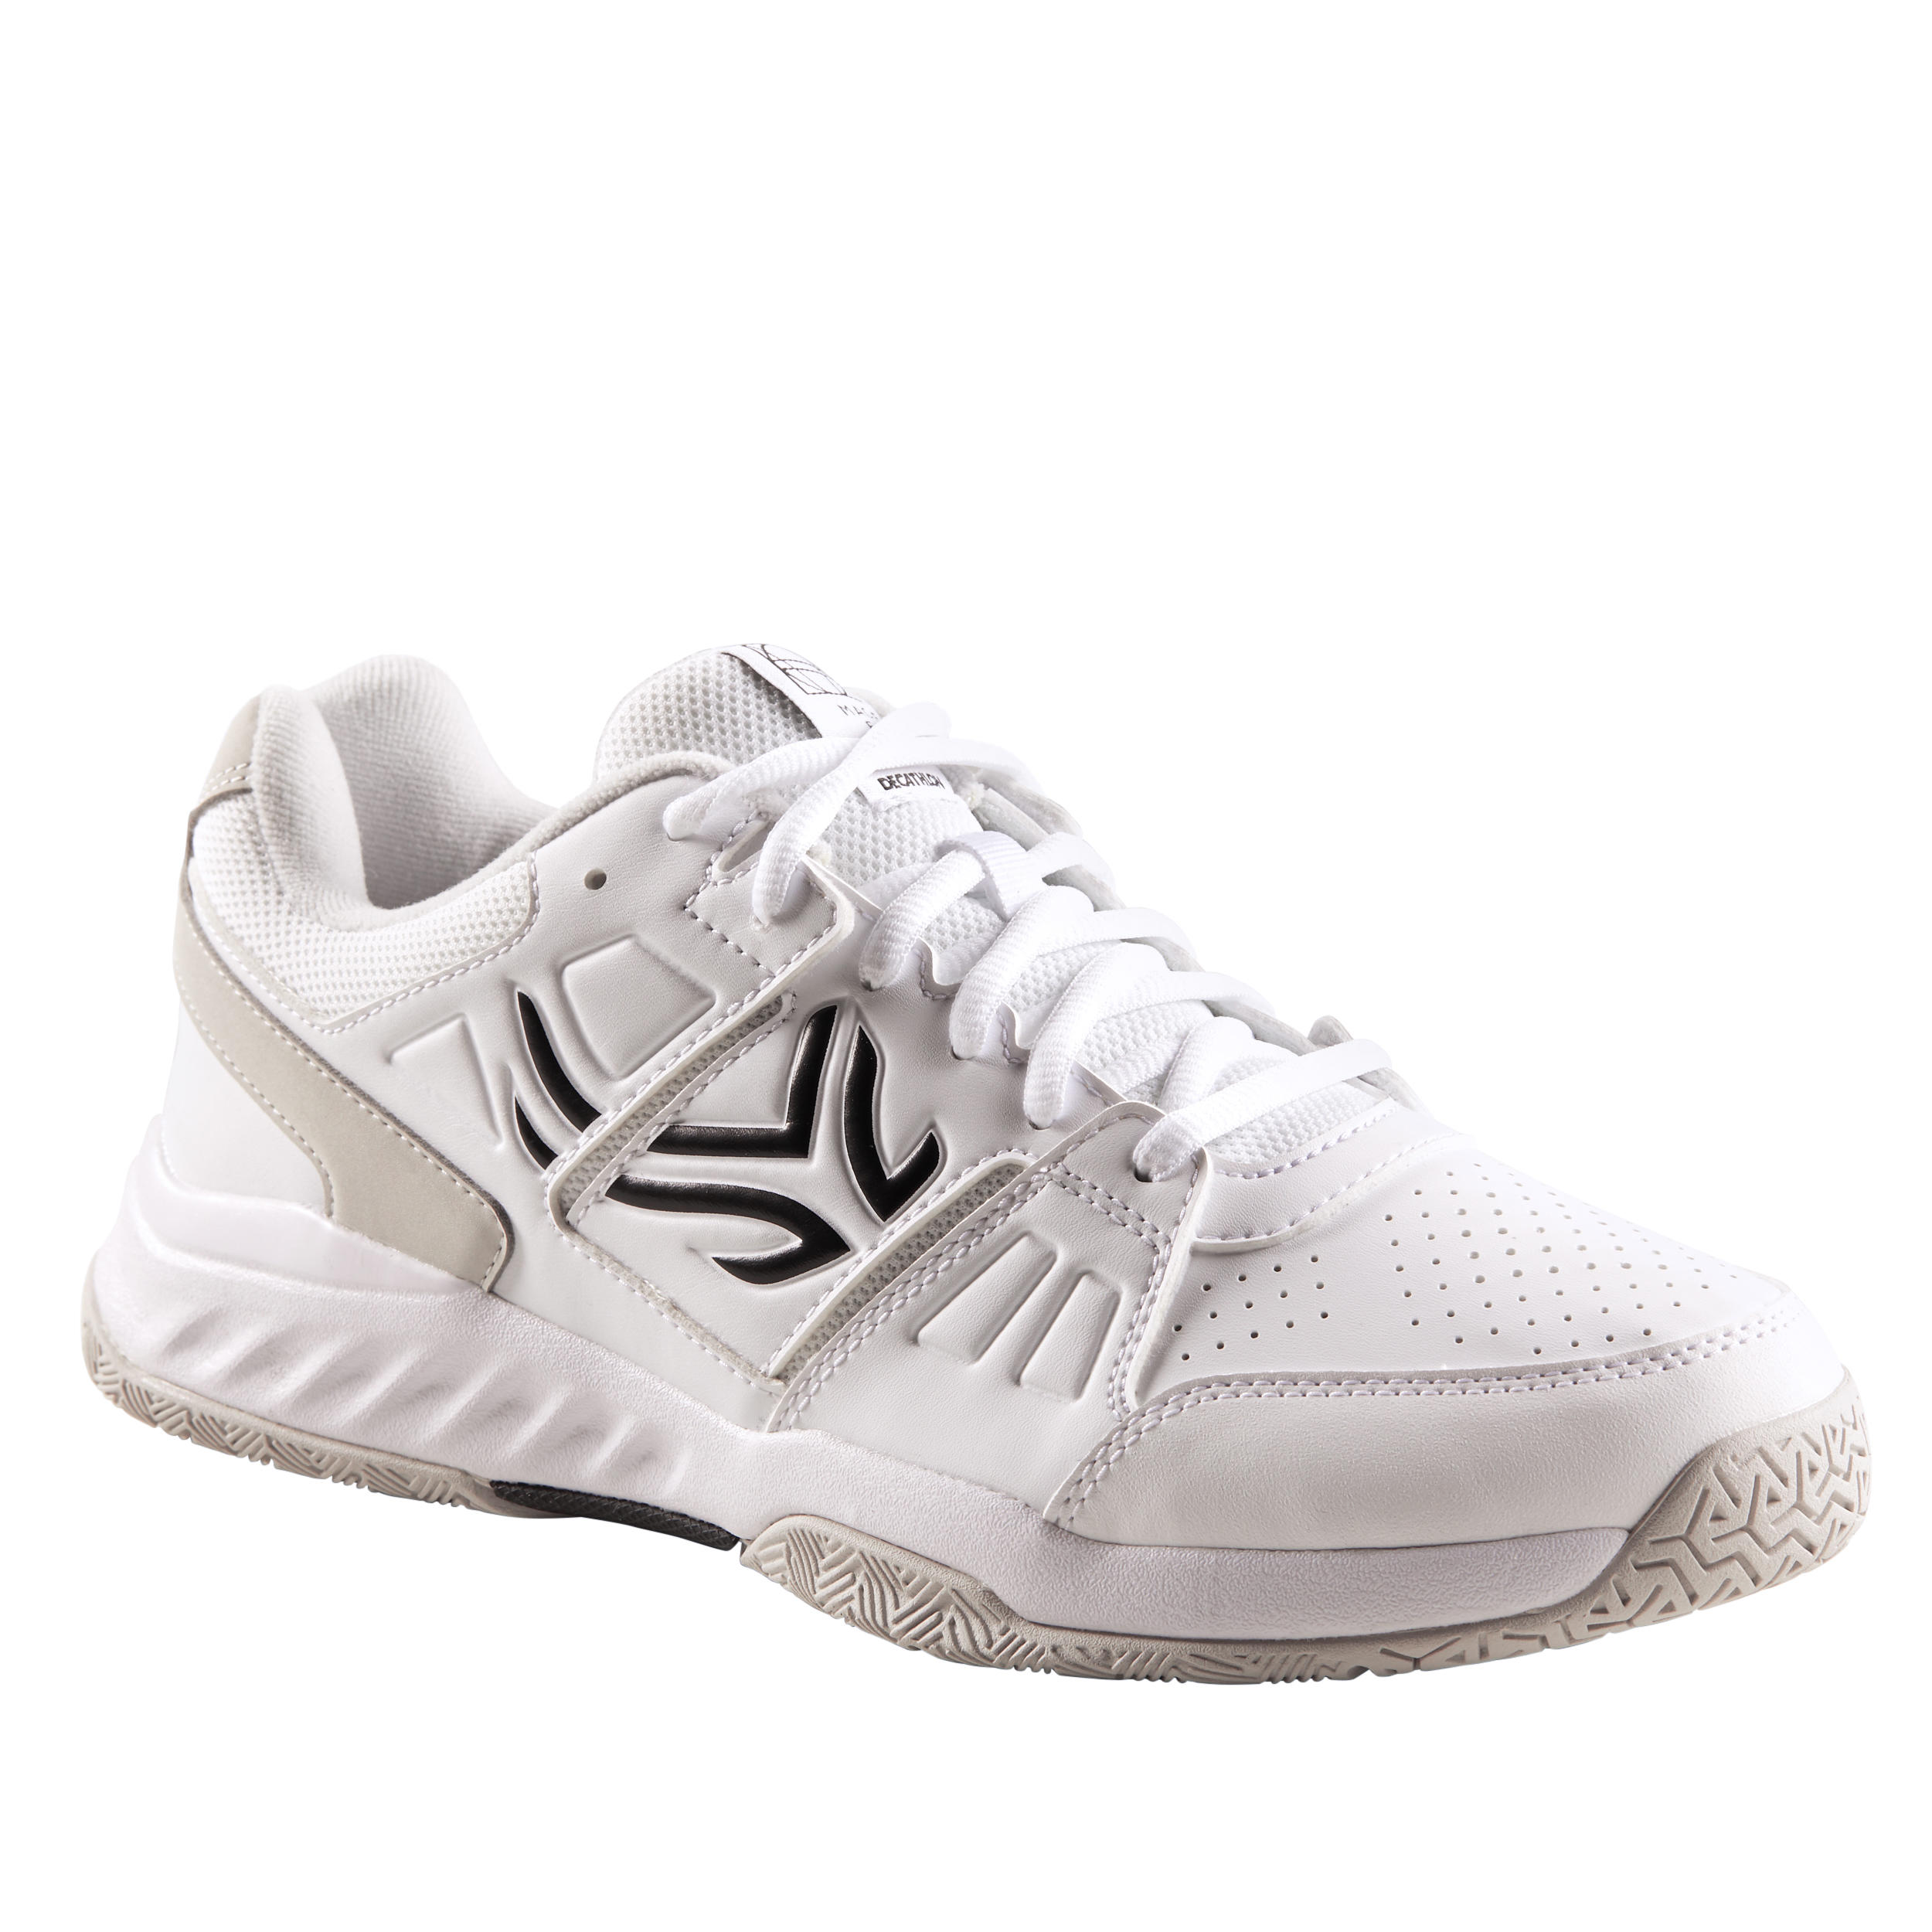 places to buy athletic shoes near me